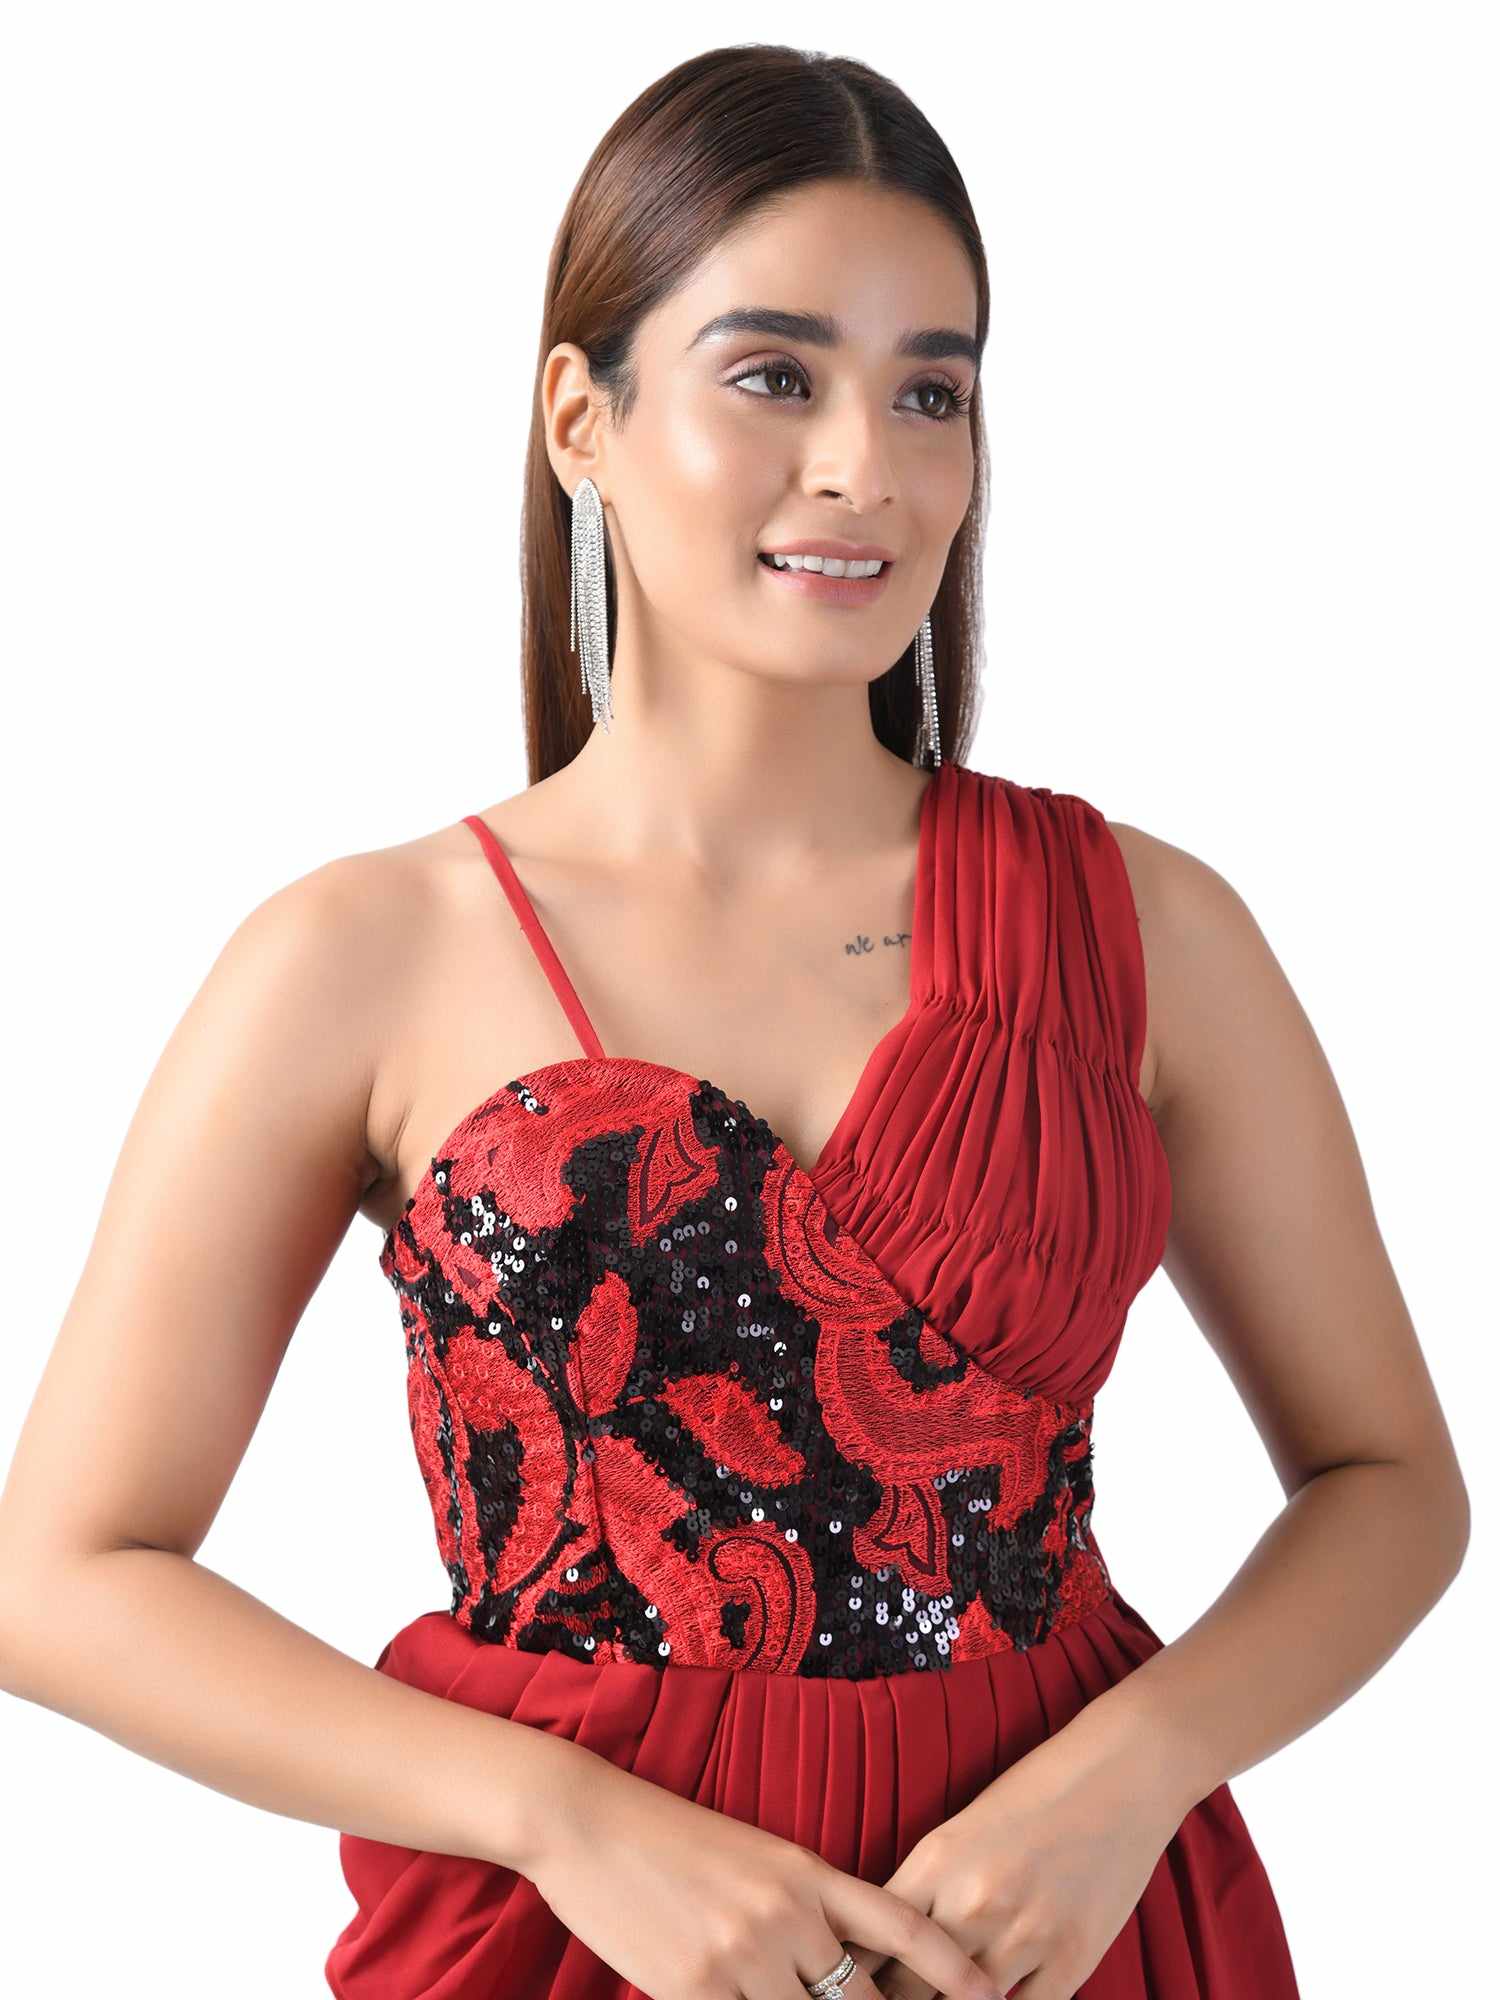 paola embroired corset red draped dress